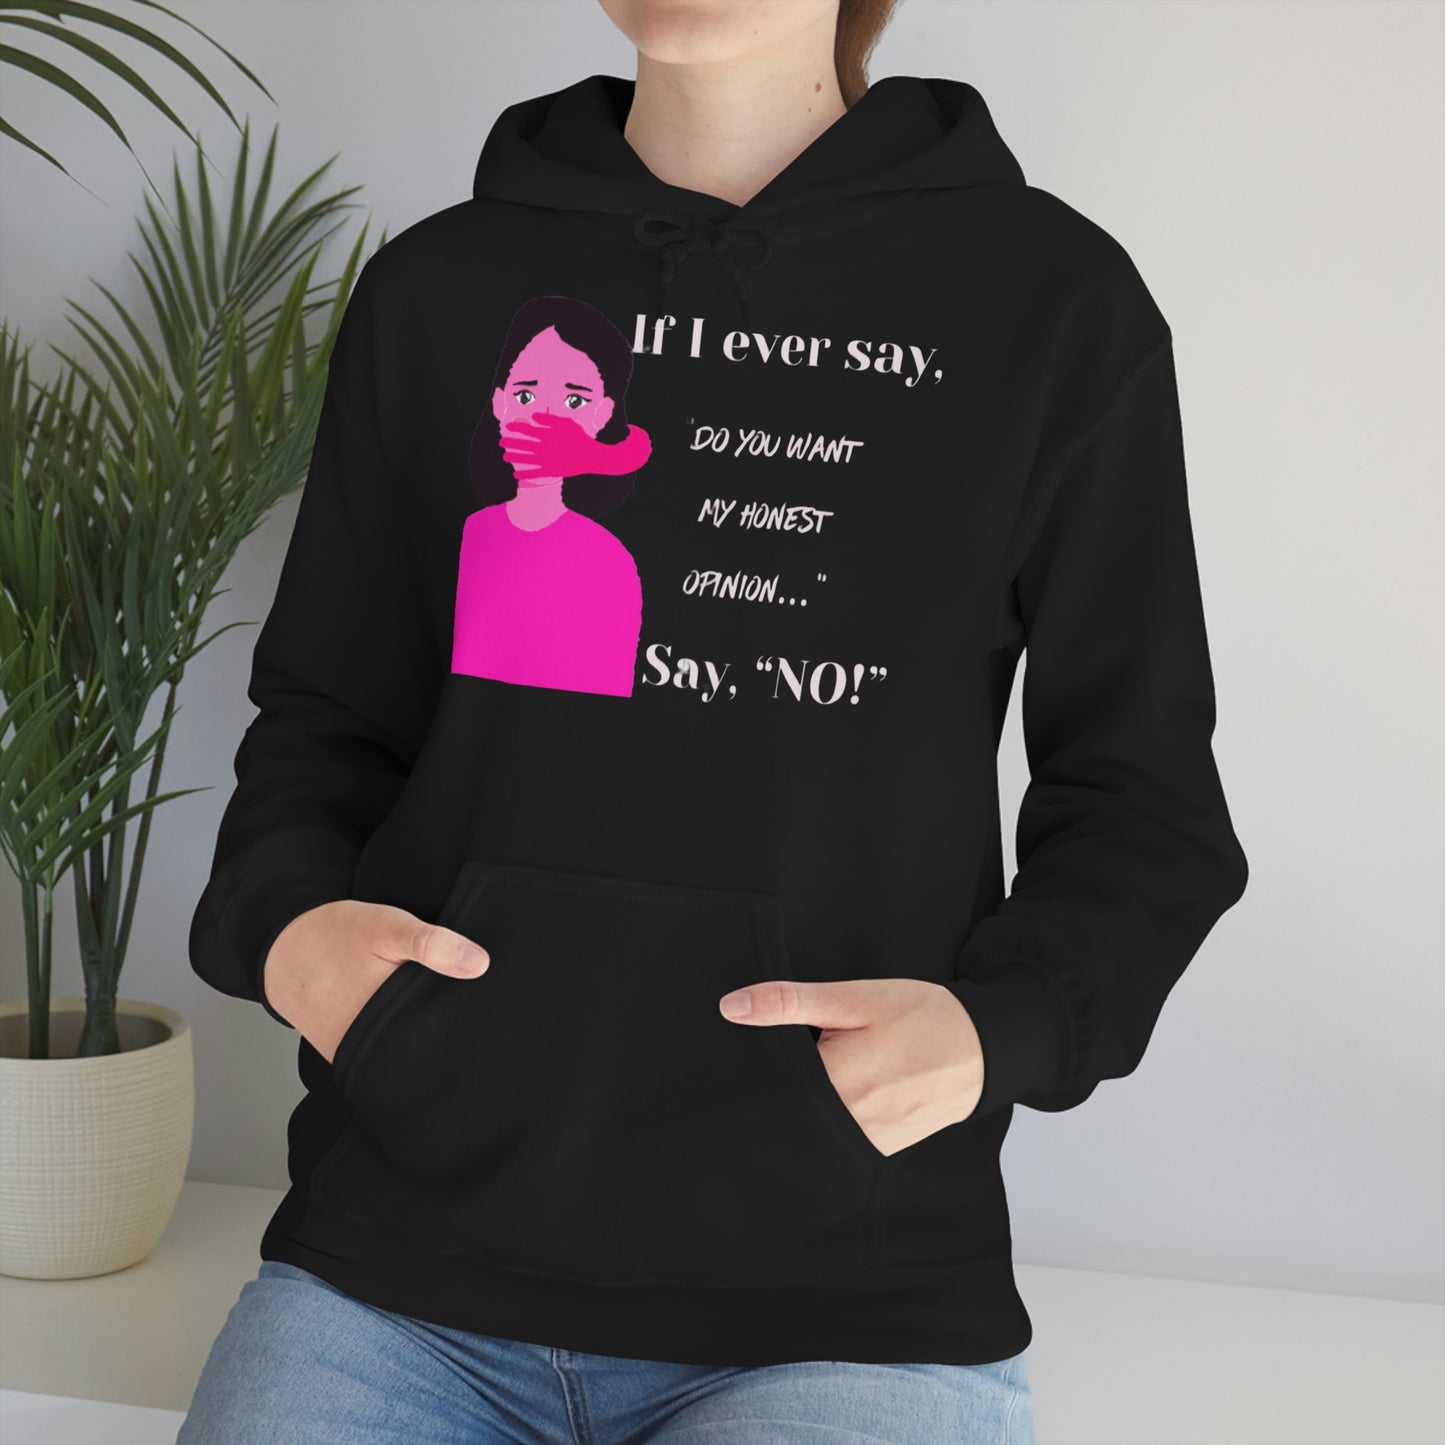 ‘If I ever say “do you want my opinion,” Say NO!” Unisex Heavy Blend™ Hooded Sweatshirt